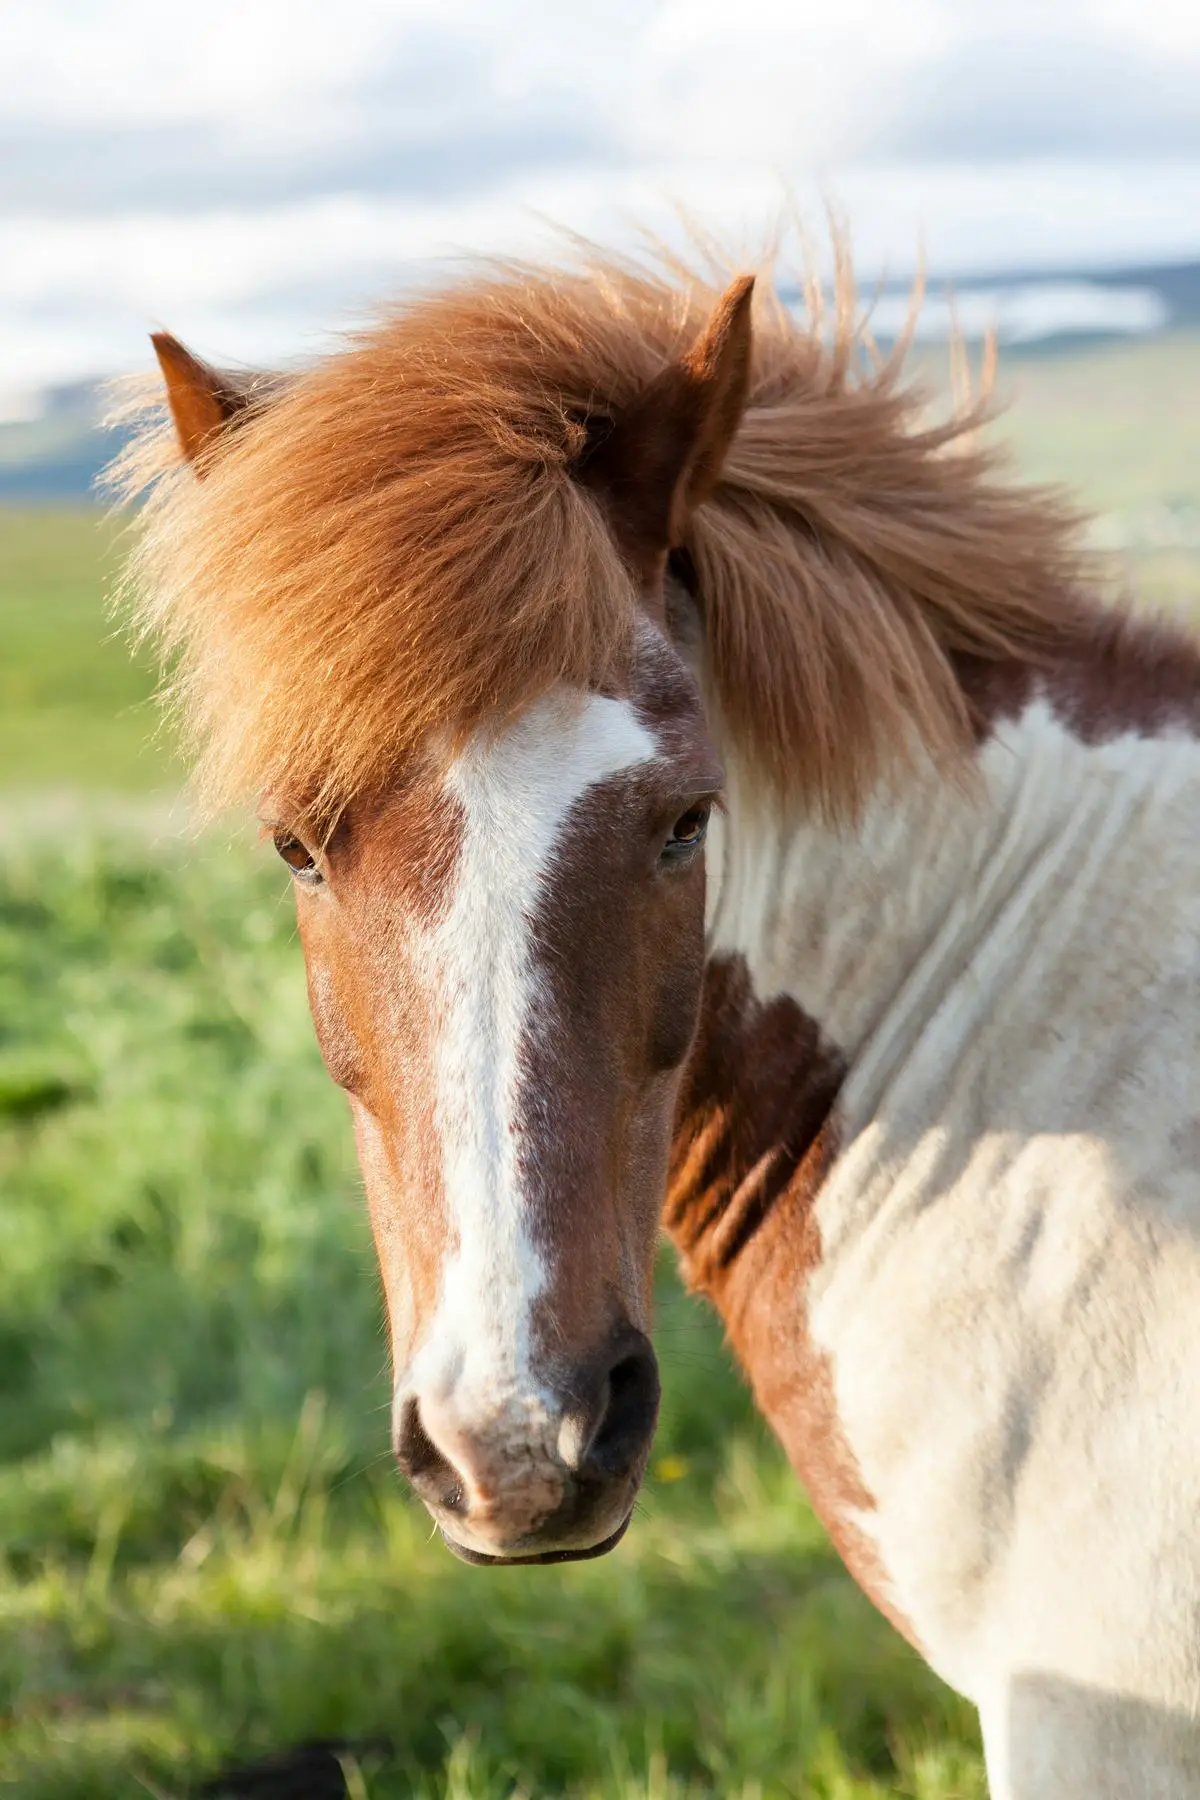 Image of a rescued horse in a sanctuary